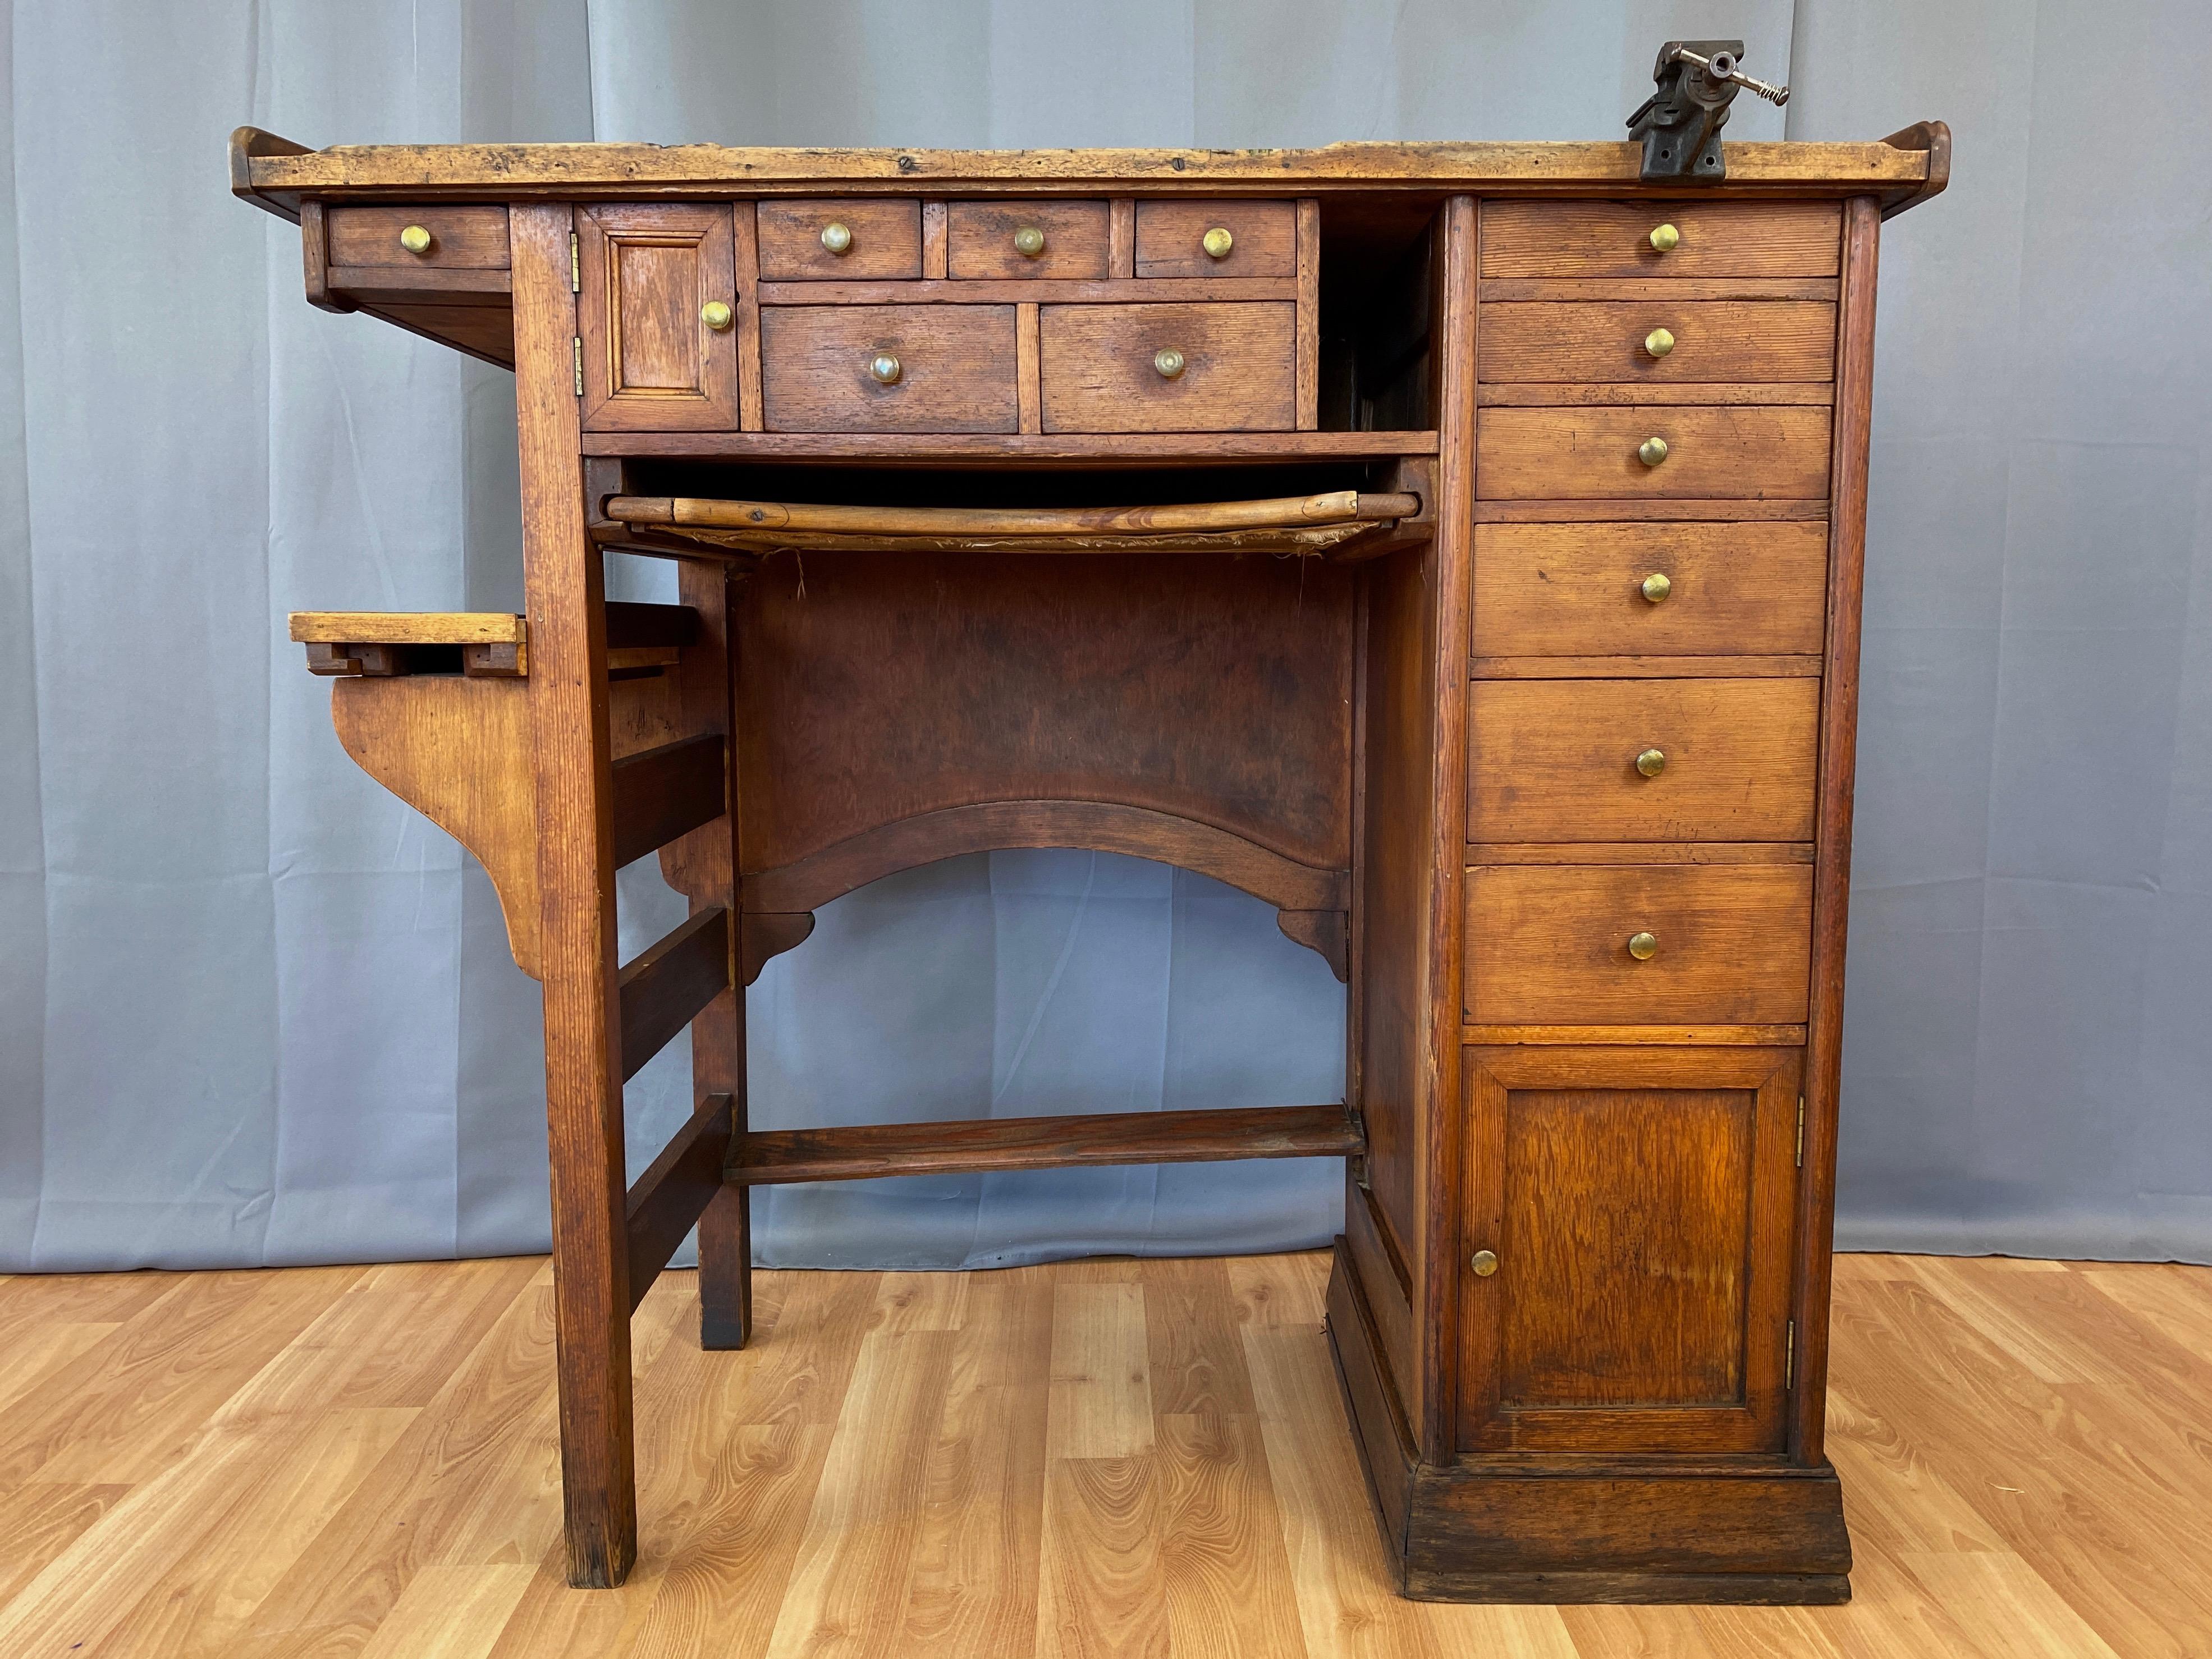 A wonderful 1920s watchmaker’s or jeweler’s multi-drawer wood workbench that’s a good height and size to serve as a standing desk when not seated on a tall stool or chair. We can also see it repurposed as a very charming and functional kitchen